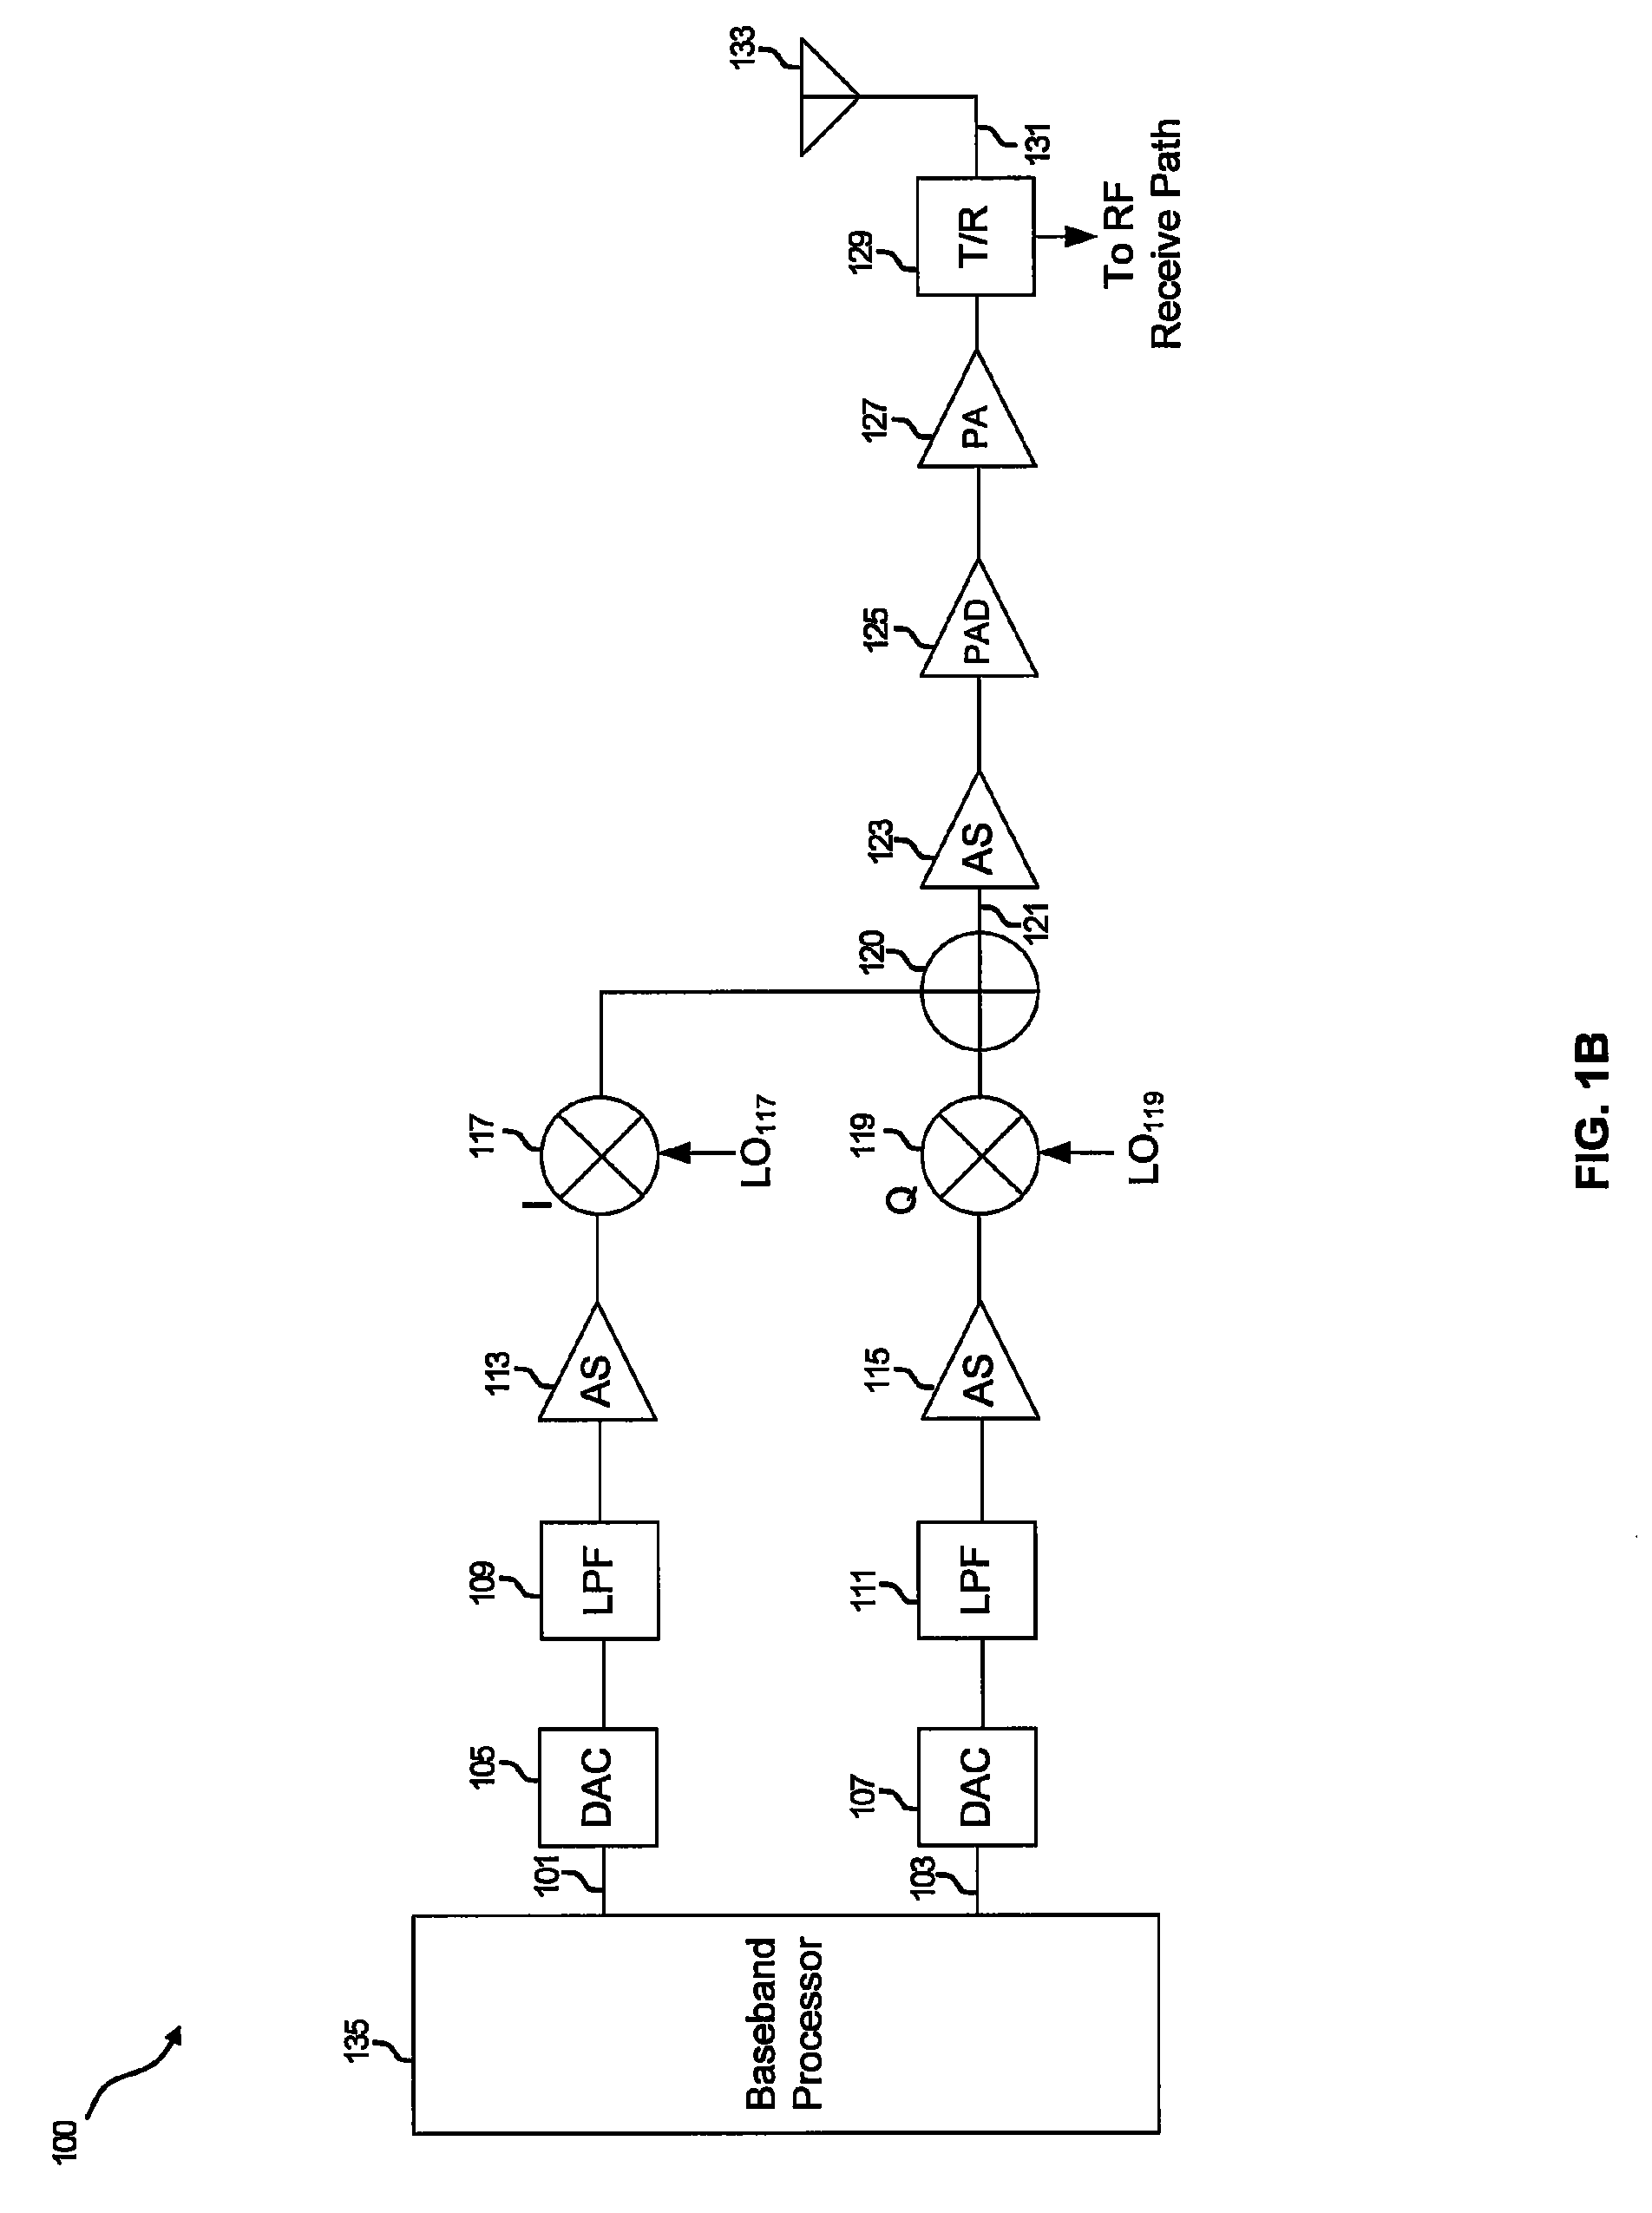 Method and system for mitigating a voltage standing wave ratio